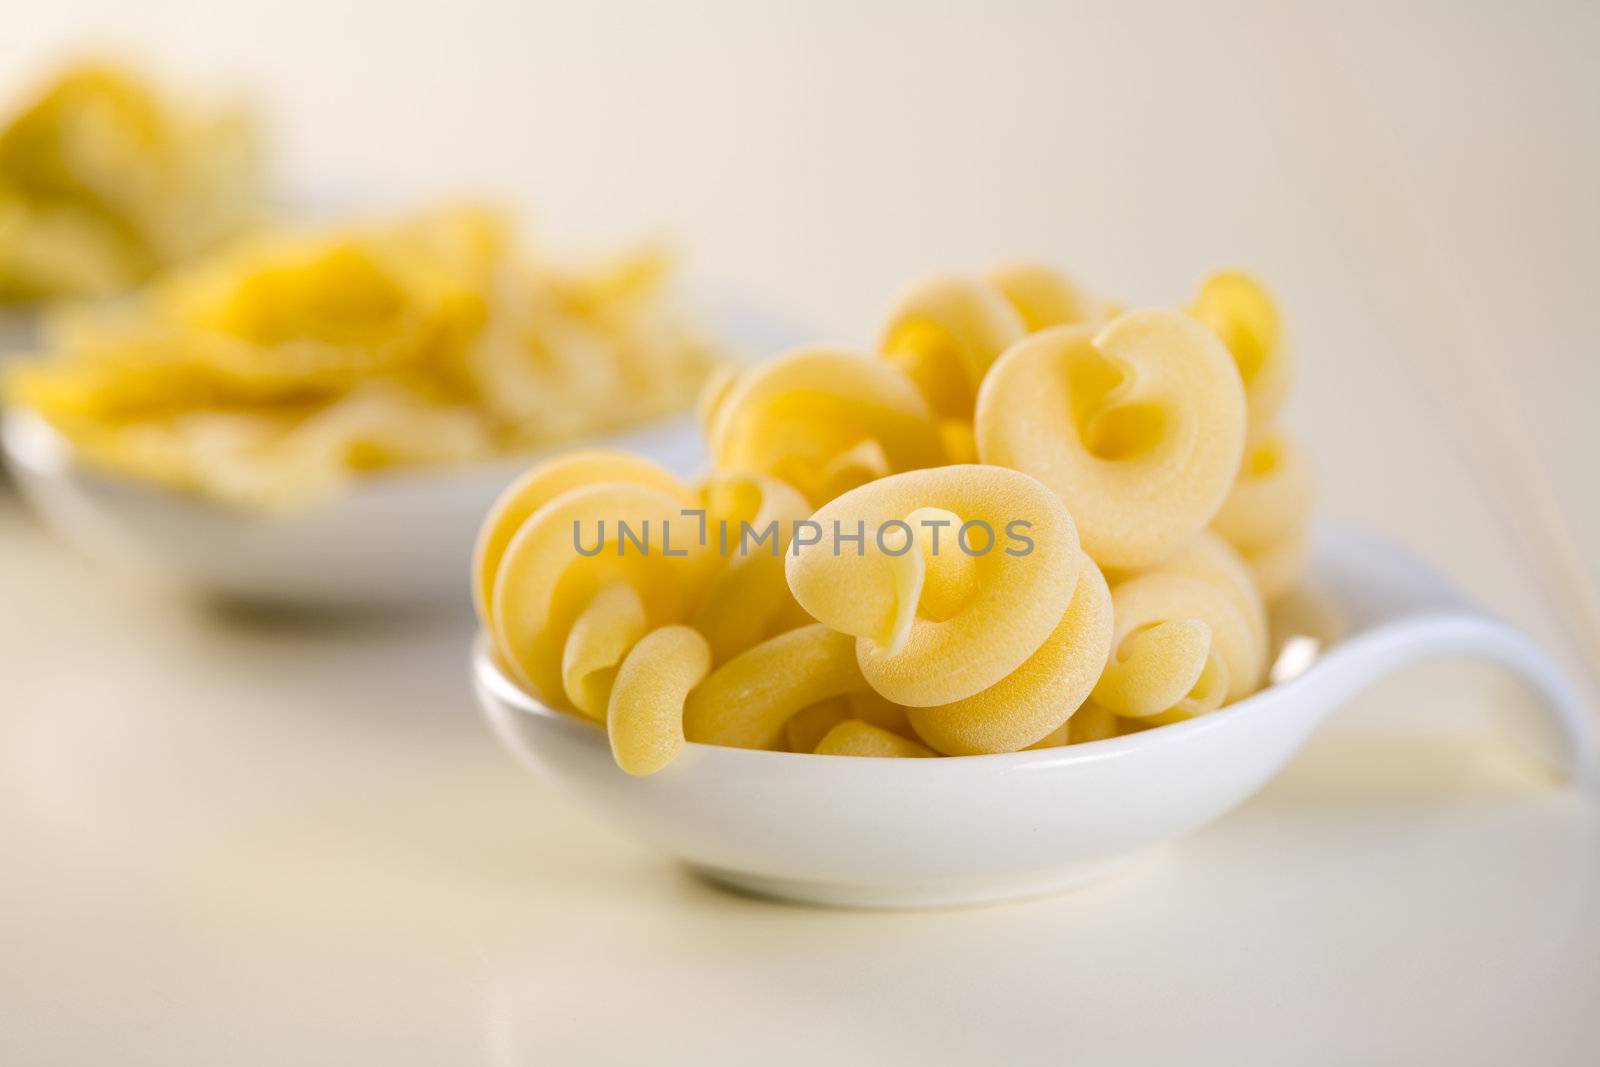 Curled up pasta in a little bowl uncooked